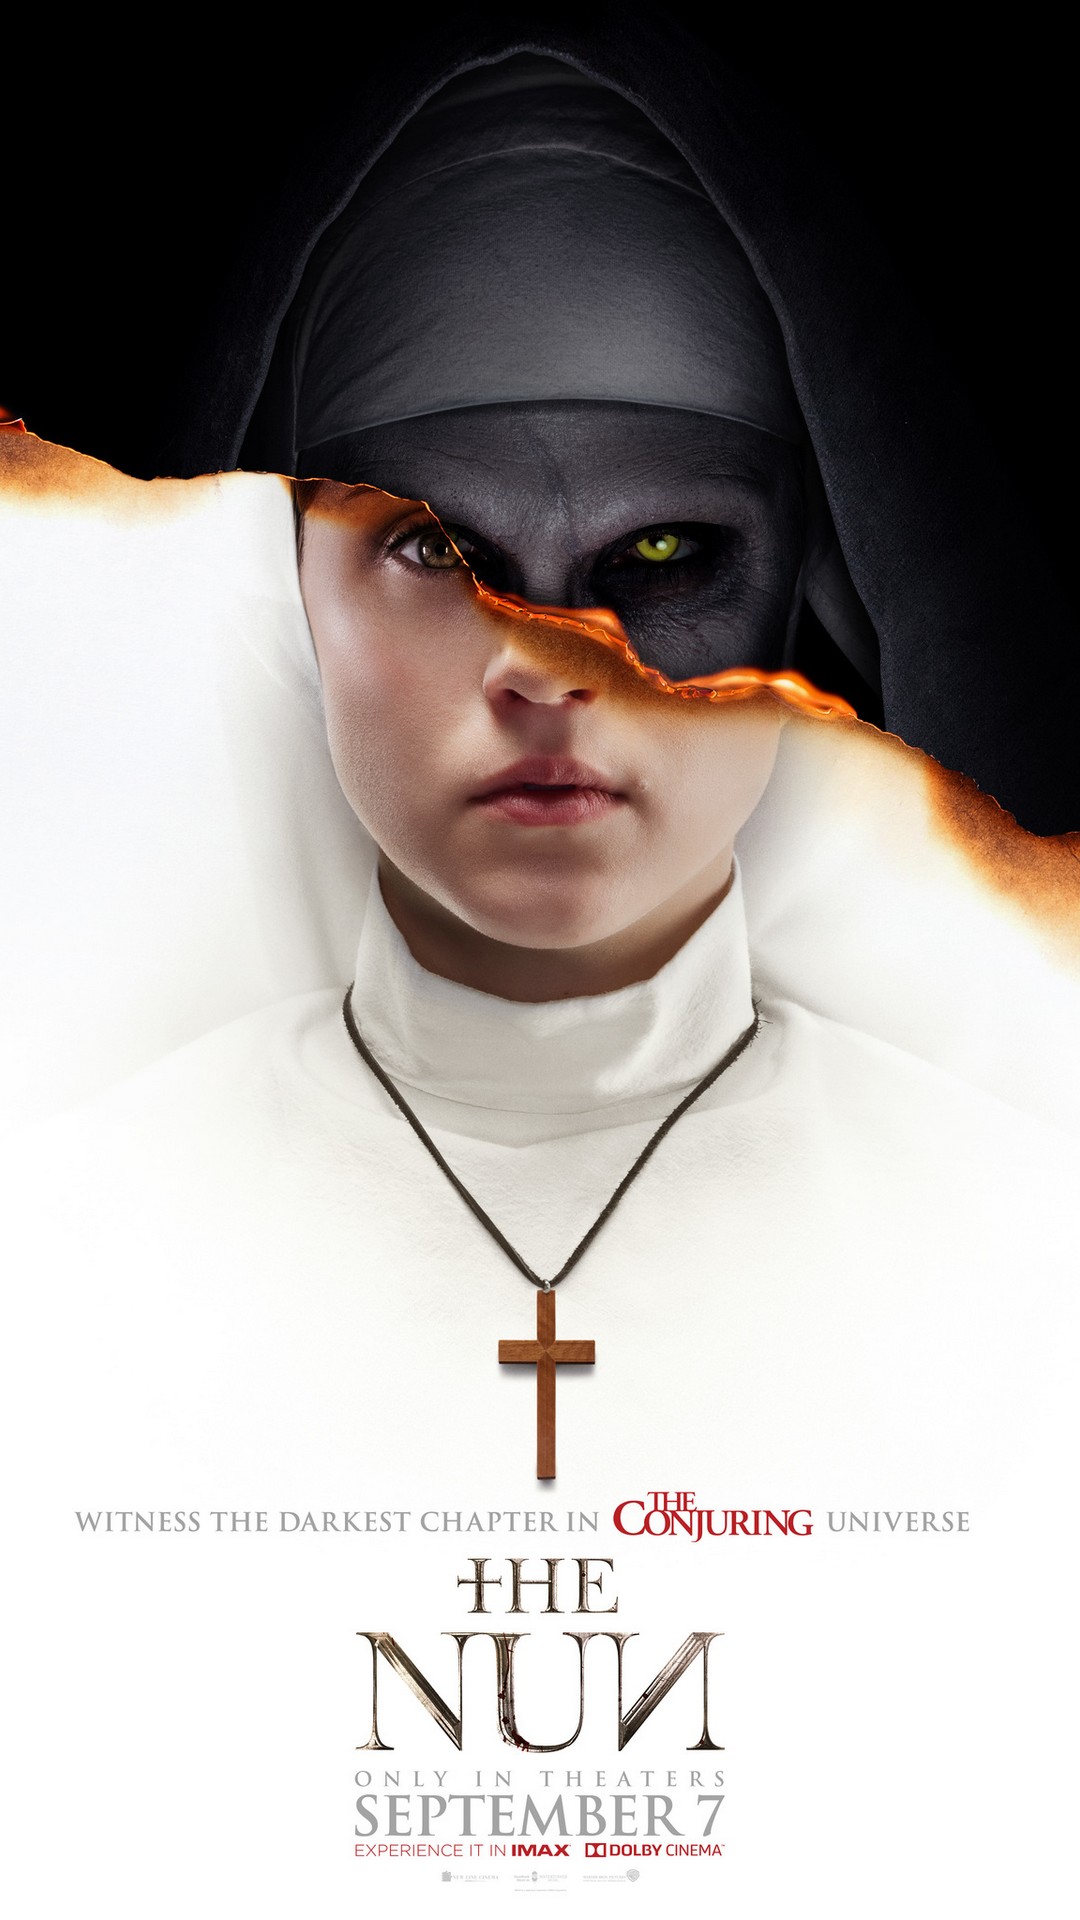 The Nun Poster Wallpaper iPhone with image resolution 1080x1920 pixel. You can make this wallpaper for your iPhone 5, 6, 7, 8, X backgrounds, Mobile Screensaver, or iPad Lock Screen